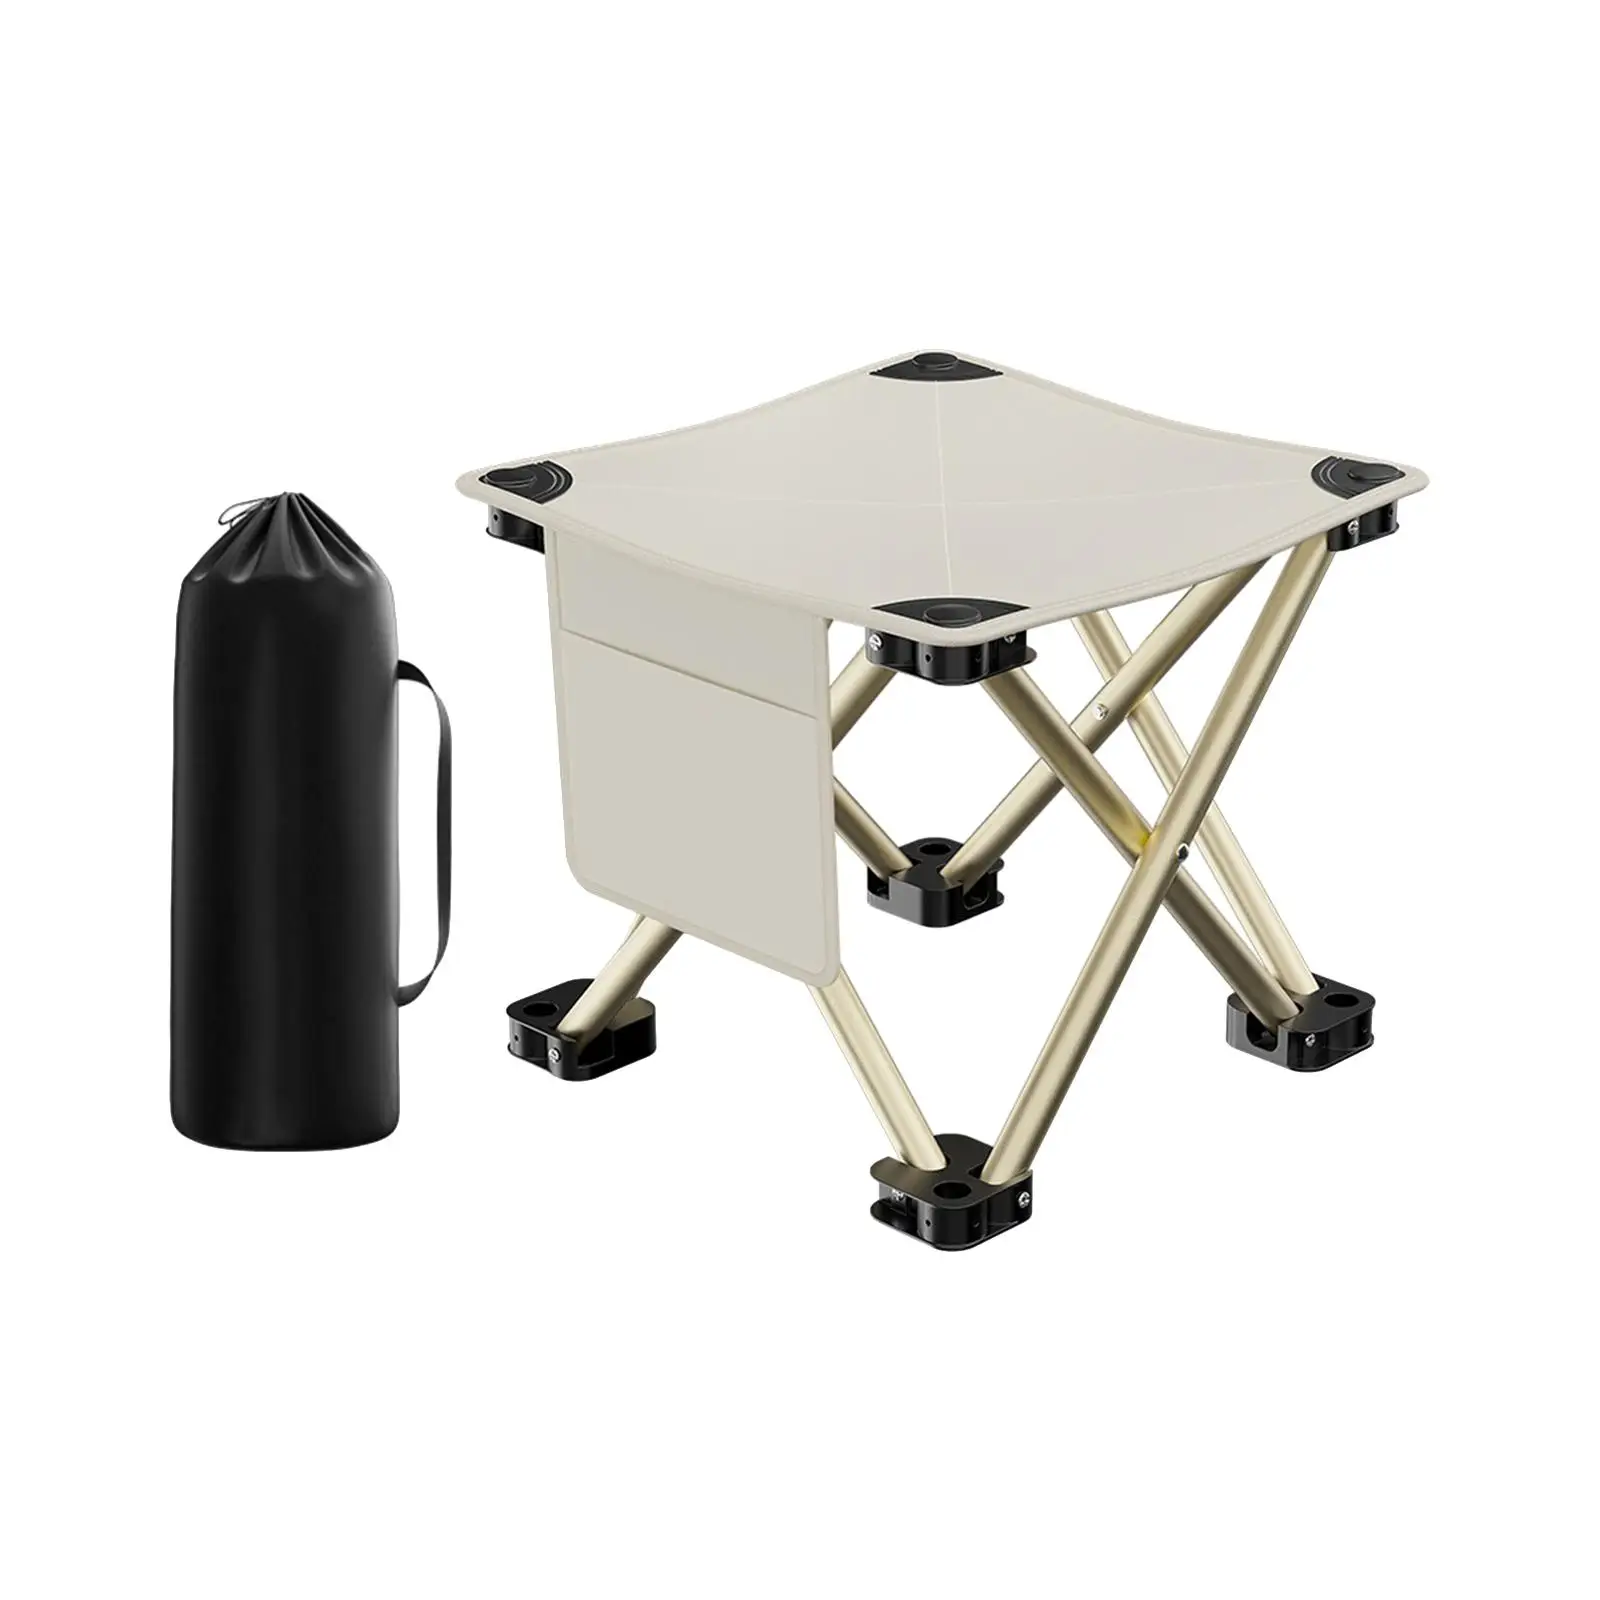 Camping Folding Stool Folding Chair with Side Pocket Collapsible Stool Saddle Chair for Patio Outdoor Hiking Concert Festival